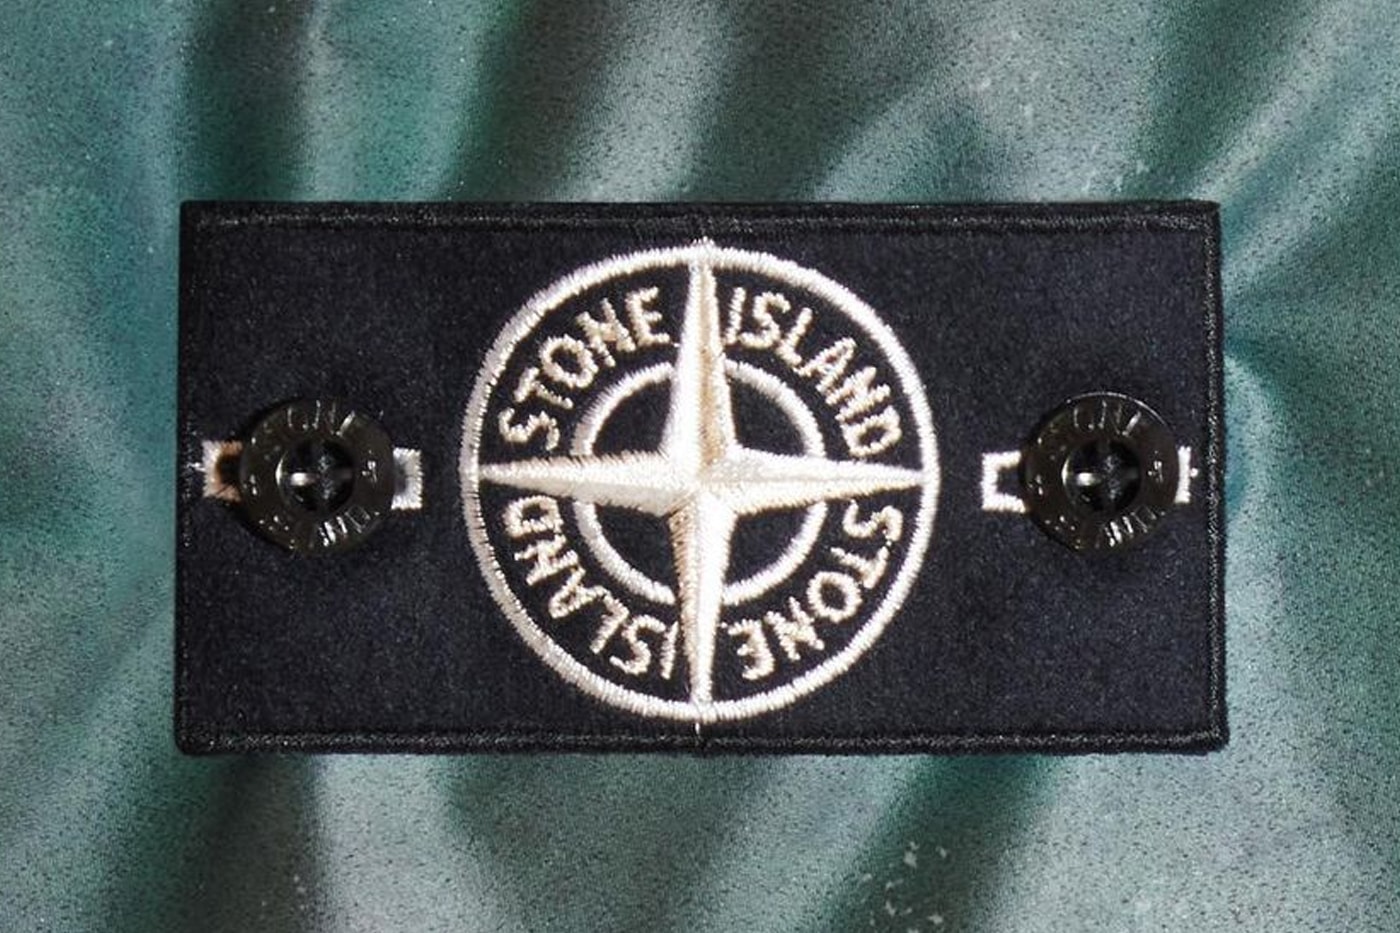 Stone Island Prototype research series 07 liquid crystal heat reactive may 23 release info date price